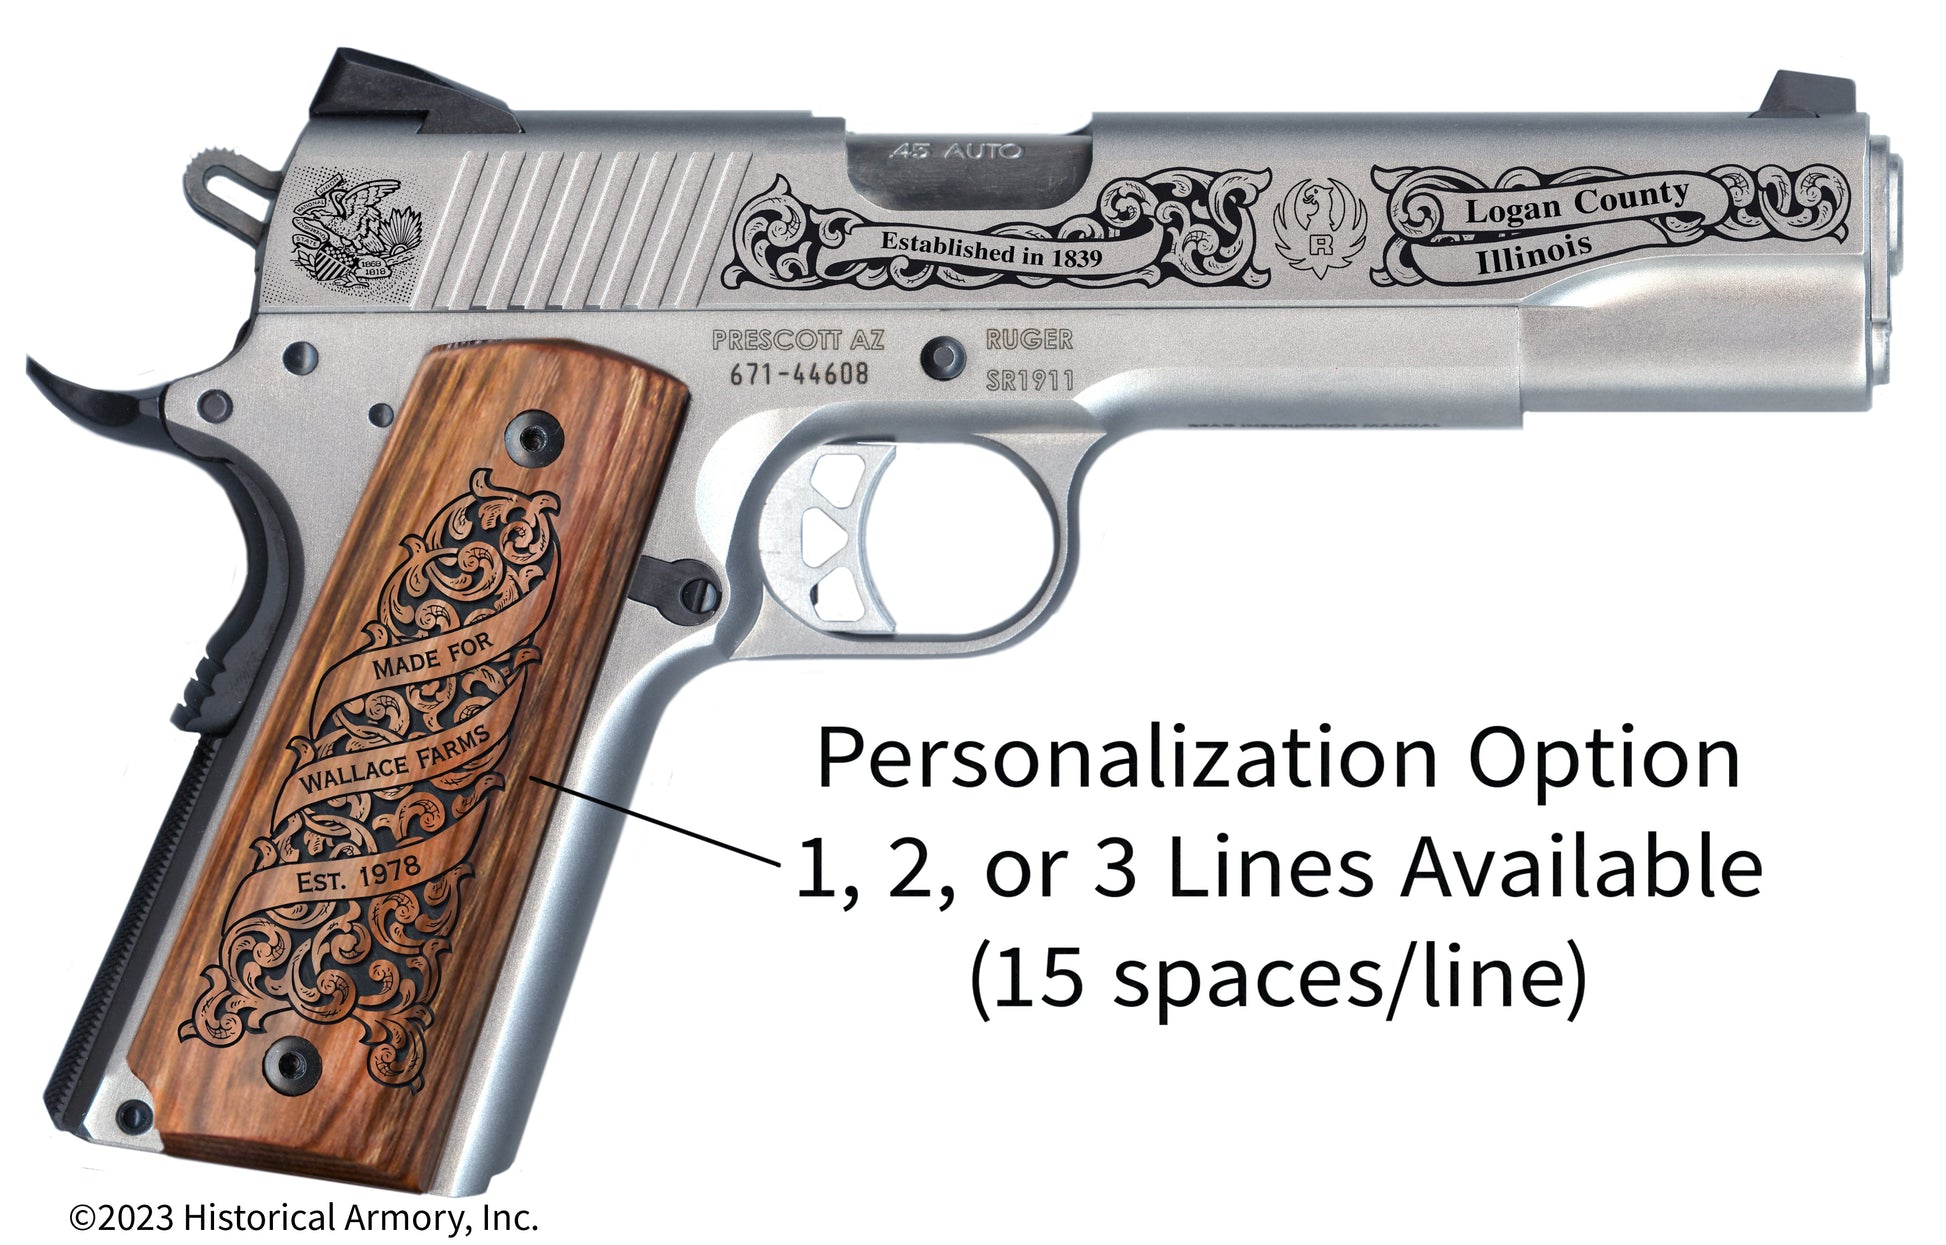 Logan County Illinois Personalized Engraved .45 Auto Ruger 1911